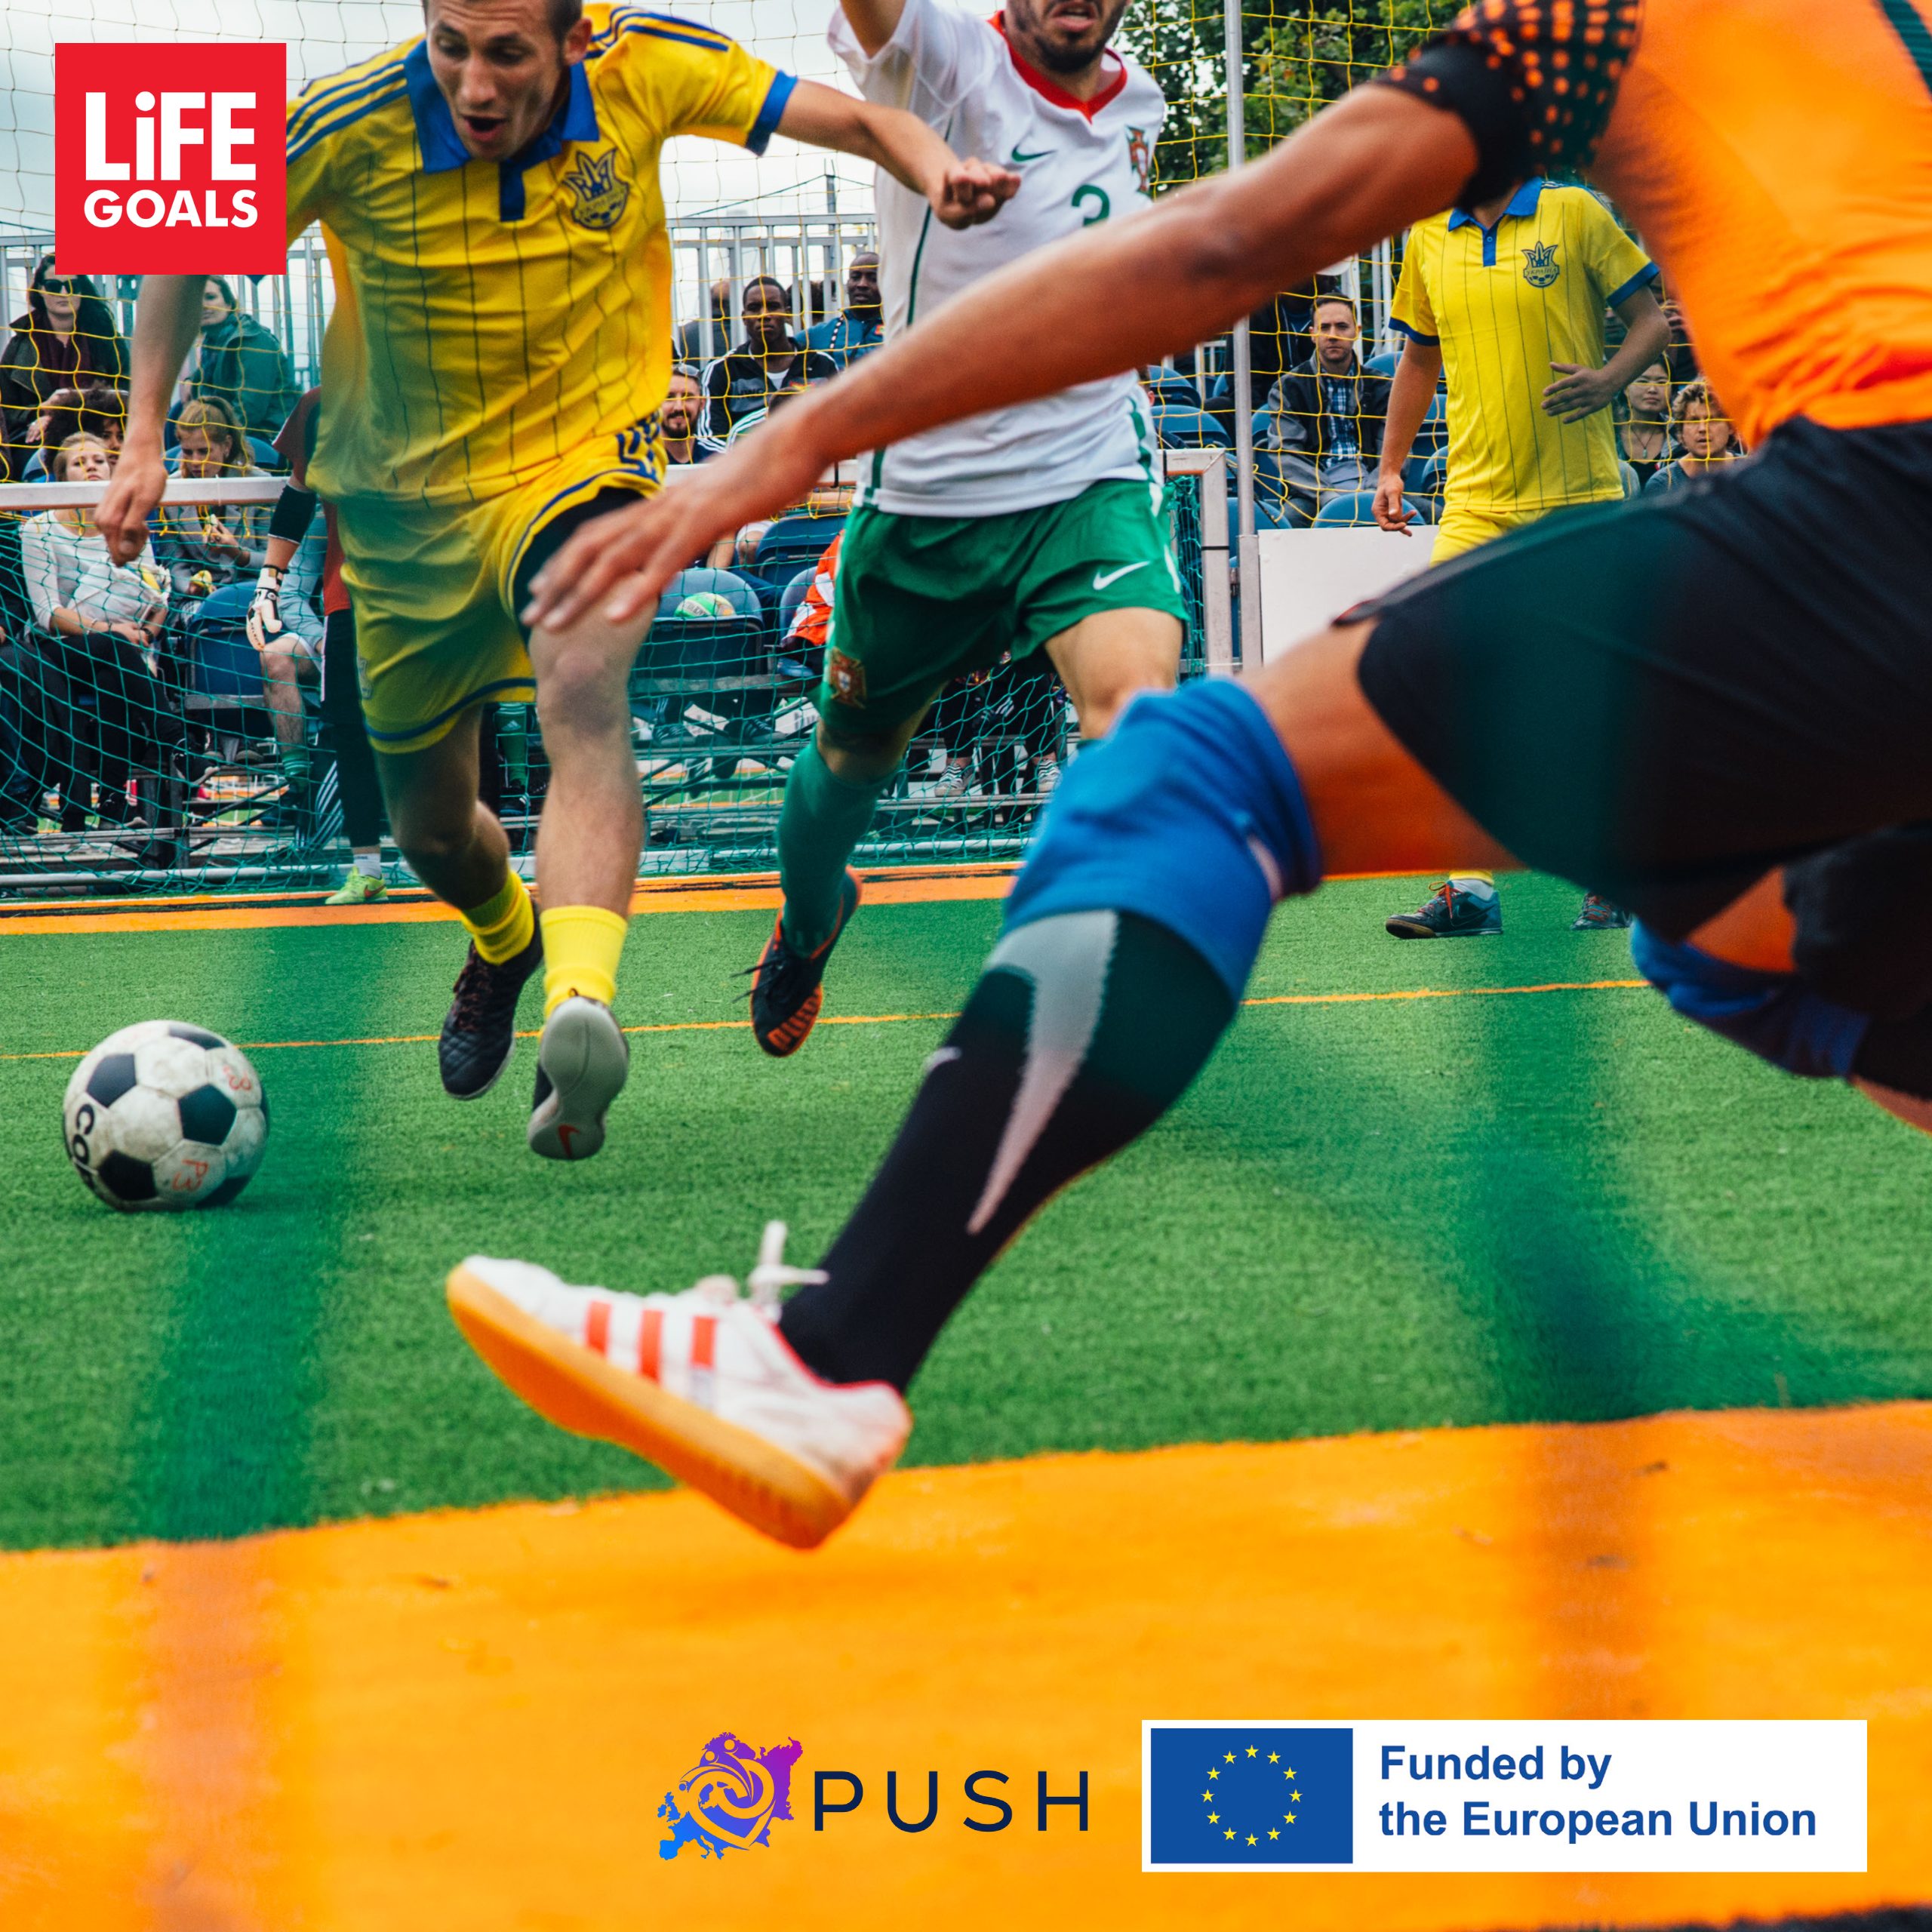 Project PUSH: Promoting Unity through Sport for Homeless